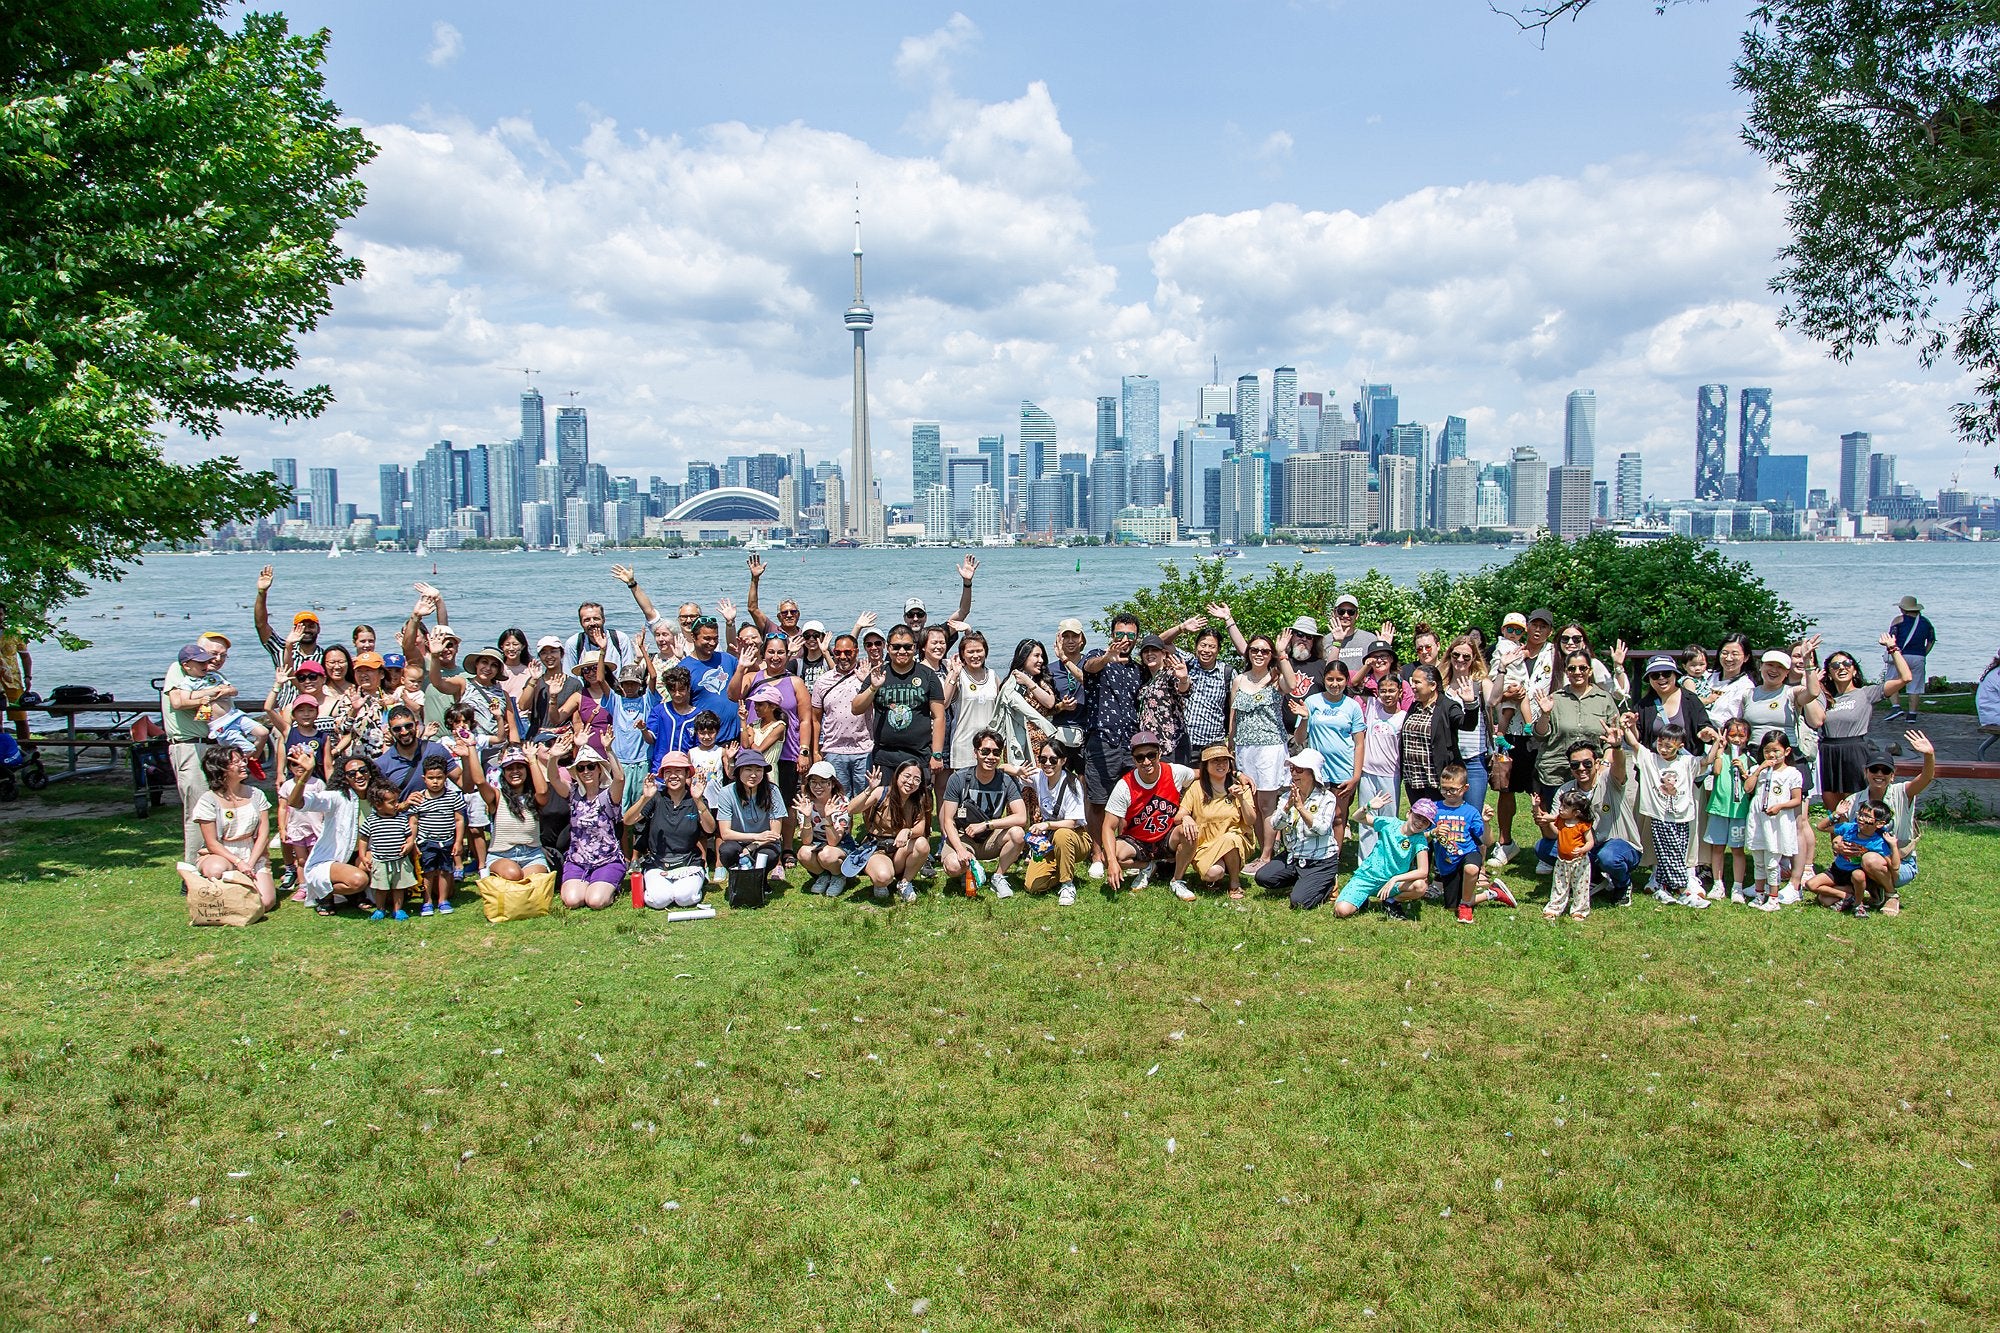 Group photo of attendees in front of the Toronto skyline